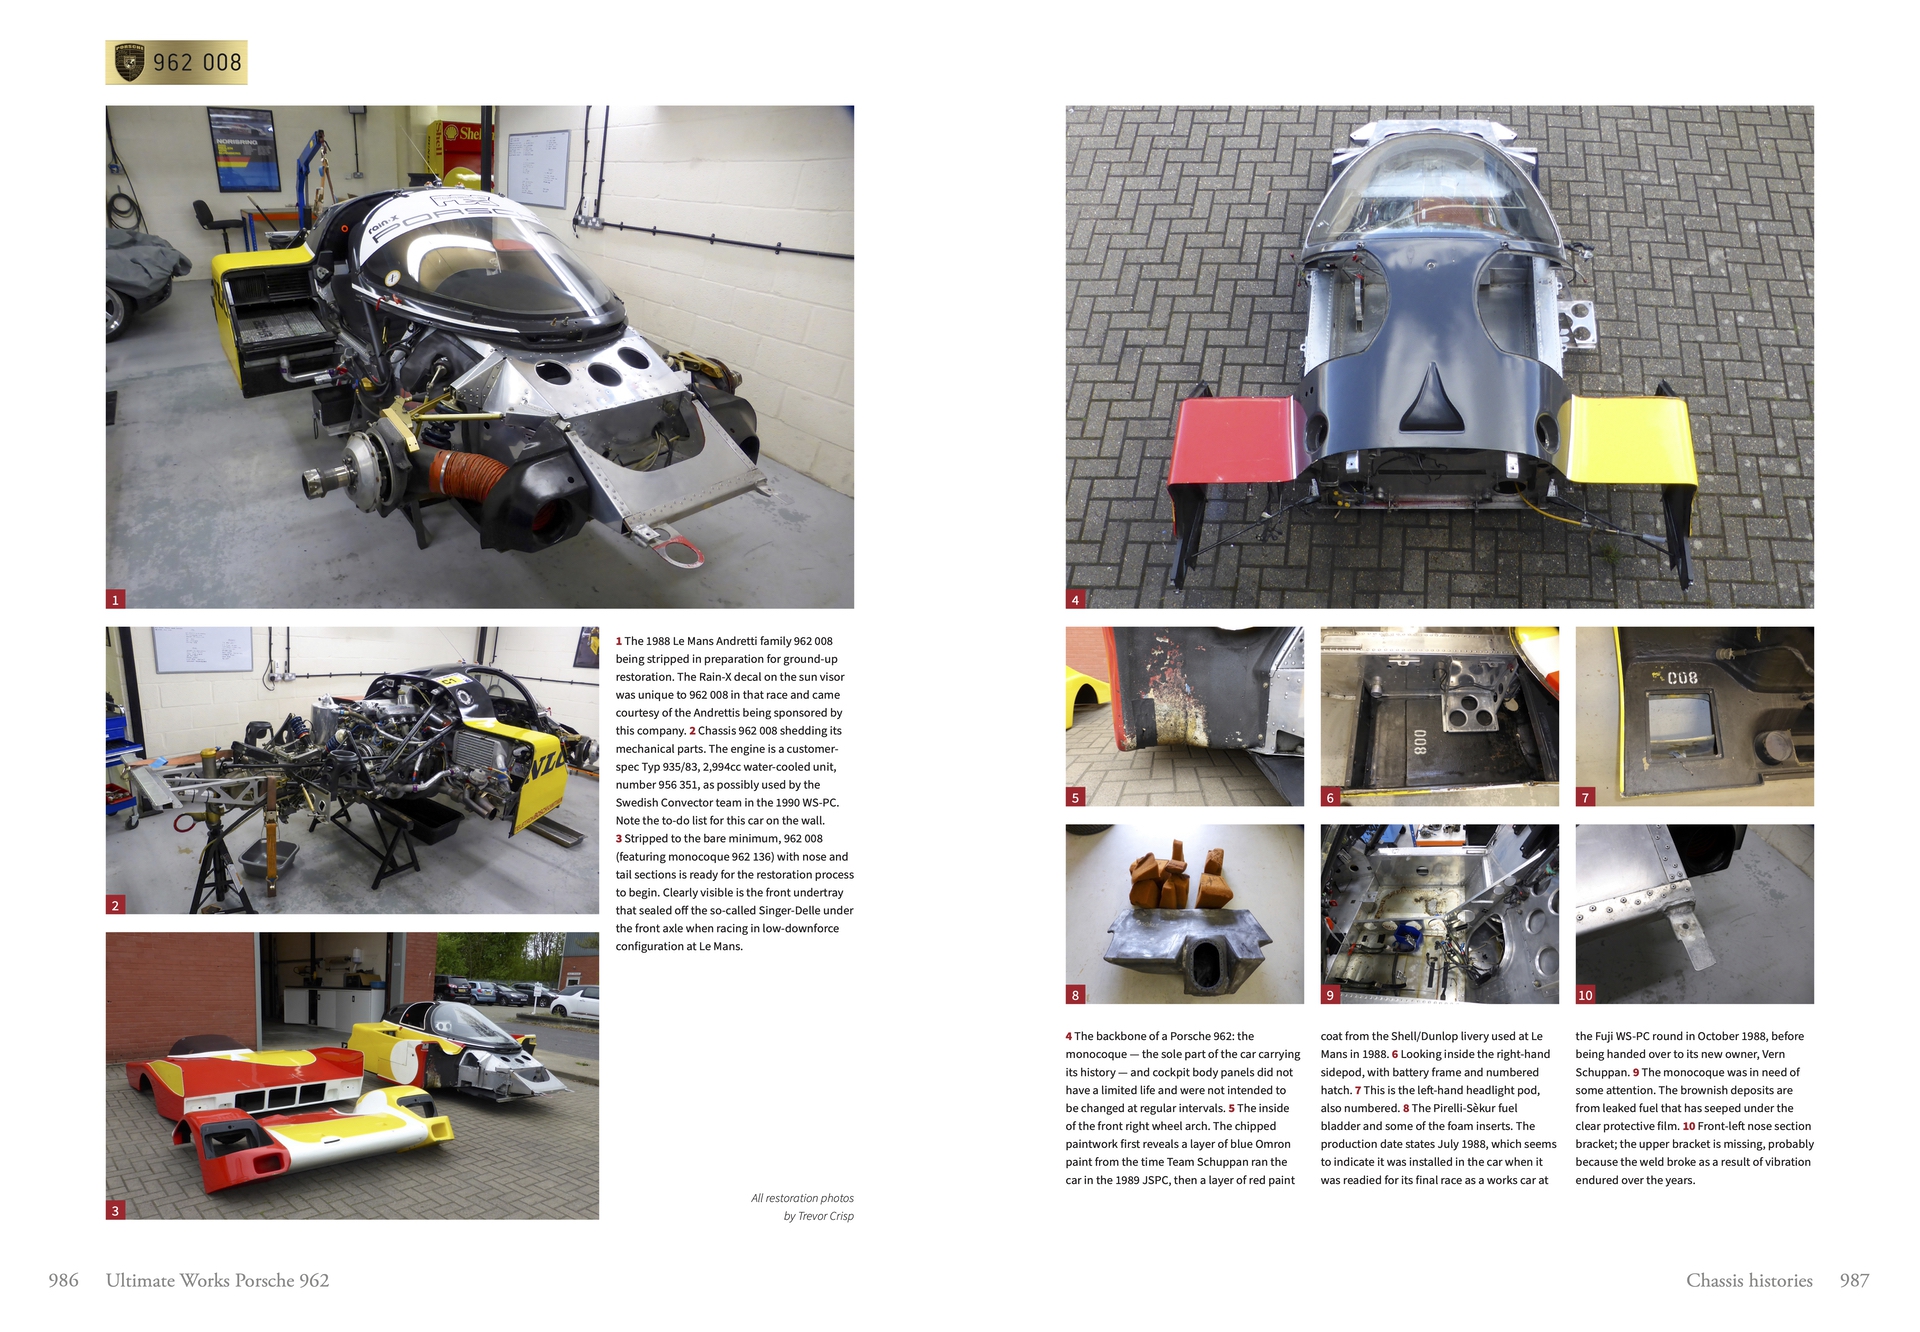 Page from Ultimate Works Porsche 962 - The Definitive History